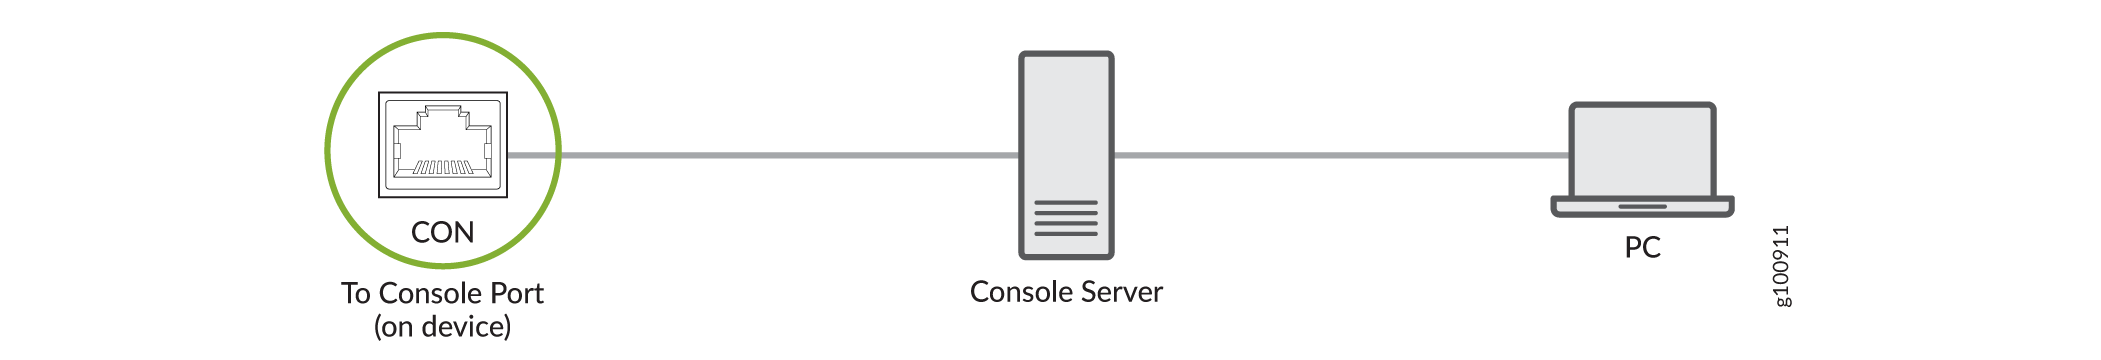 Connecting
the NFX350 Device to a Management Console Through a Console Server